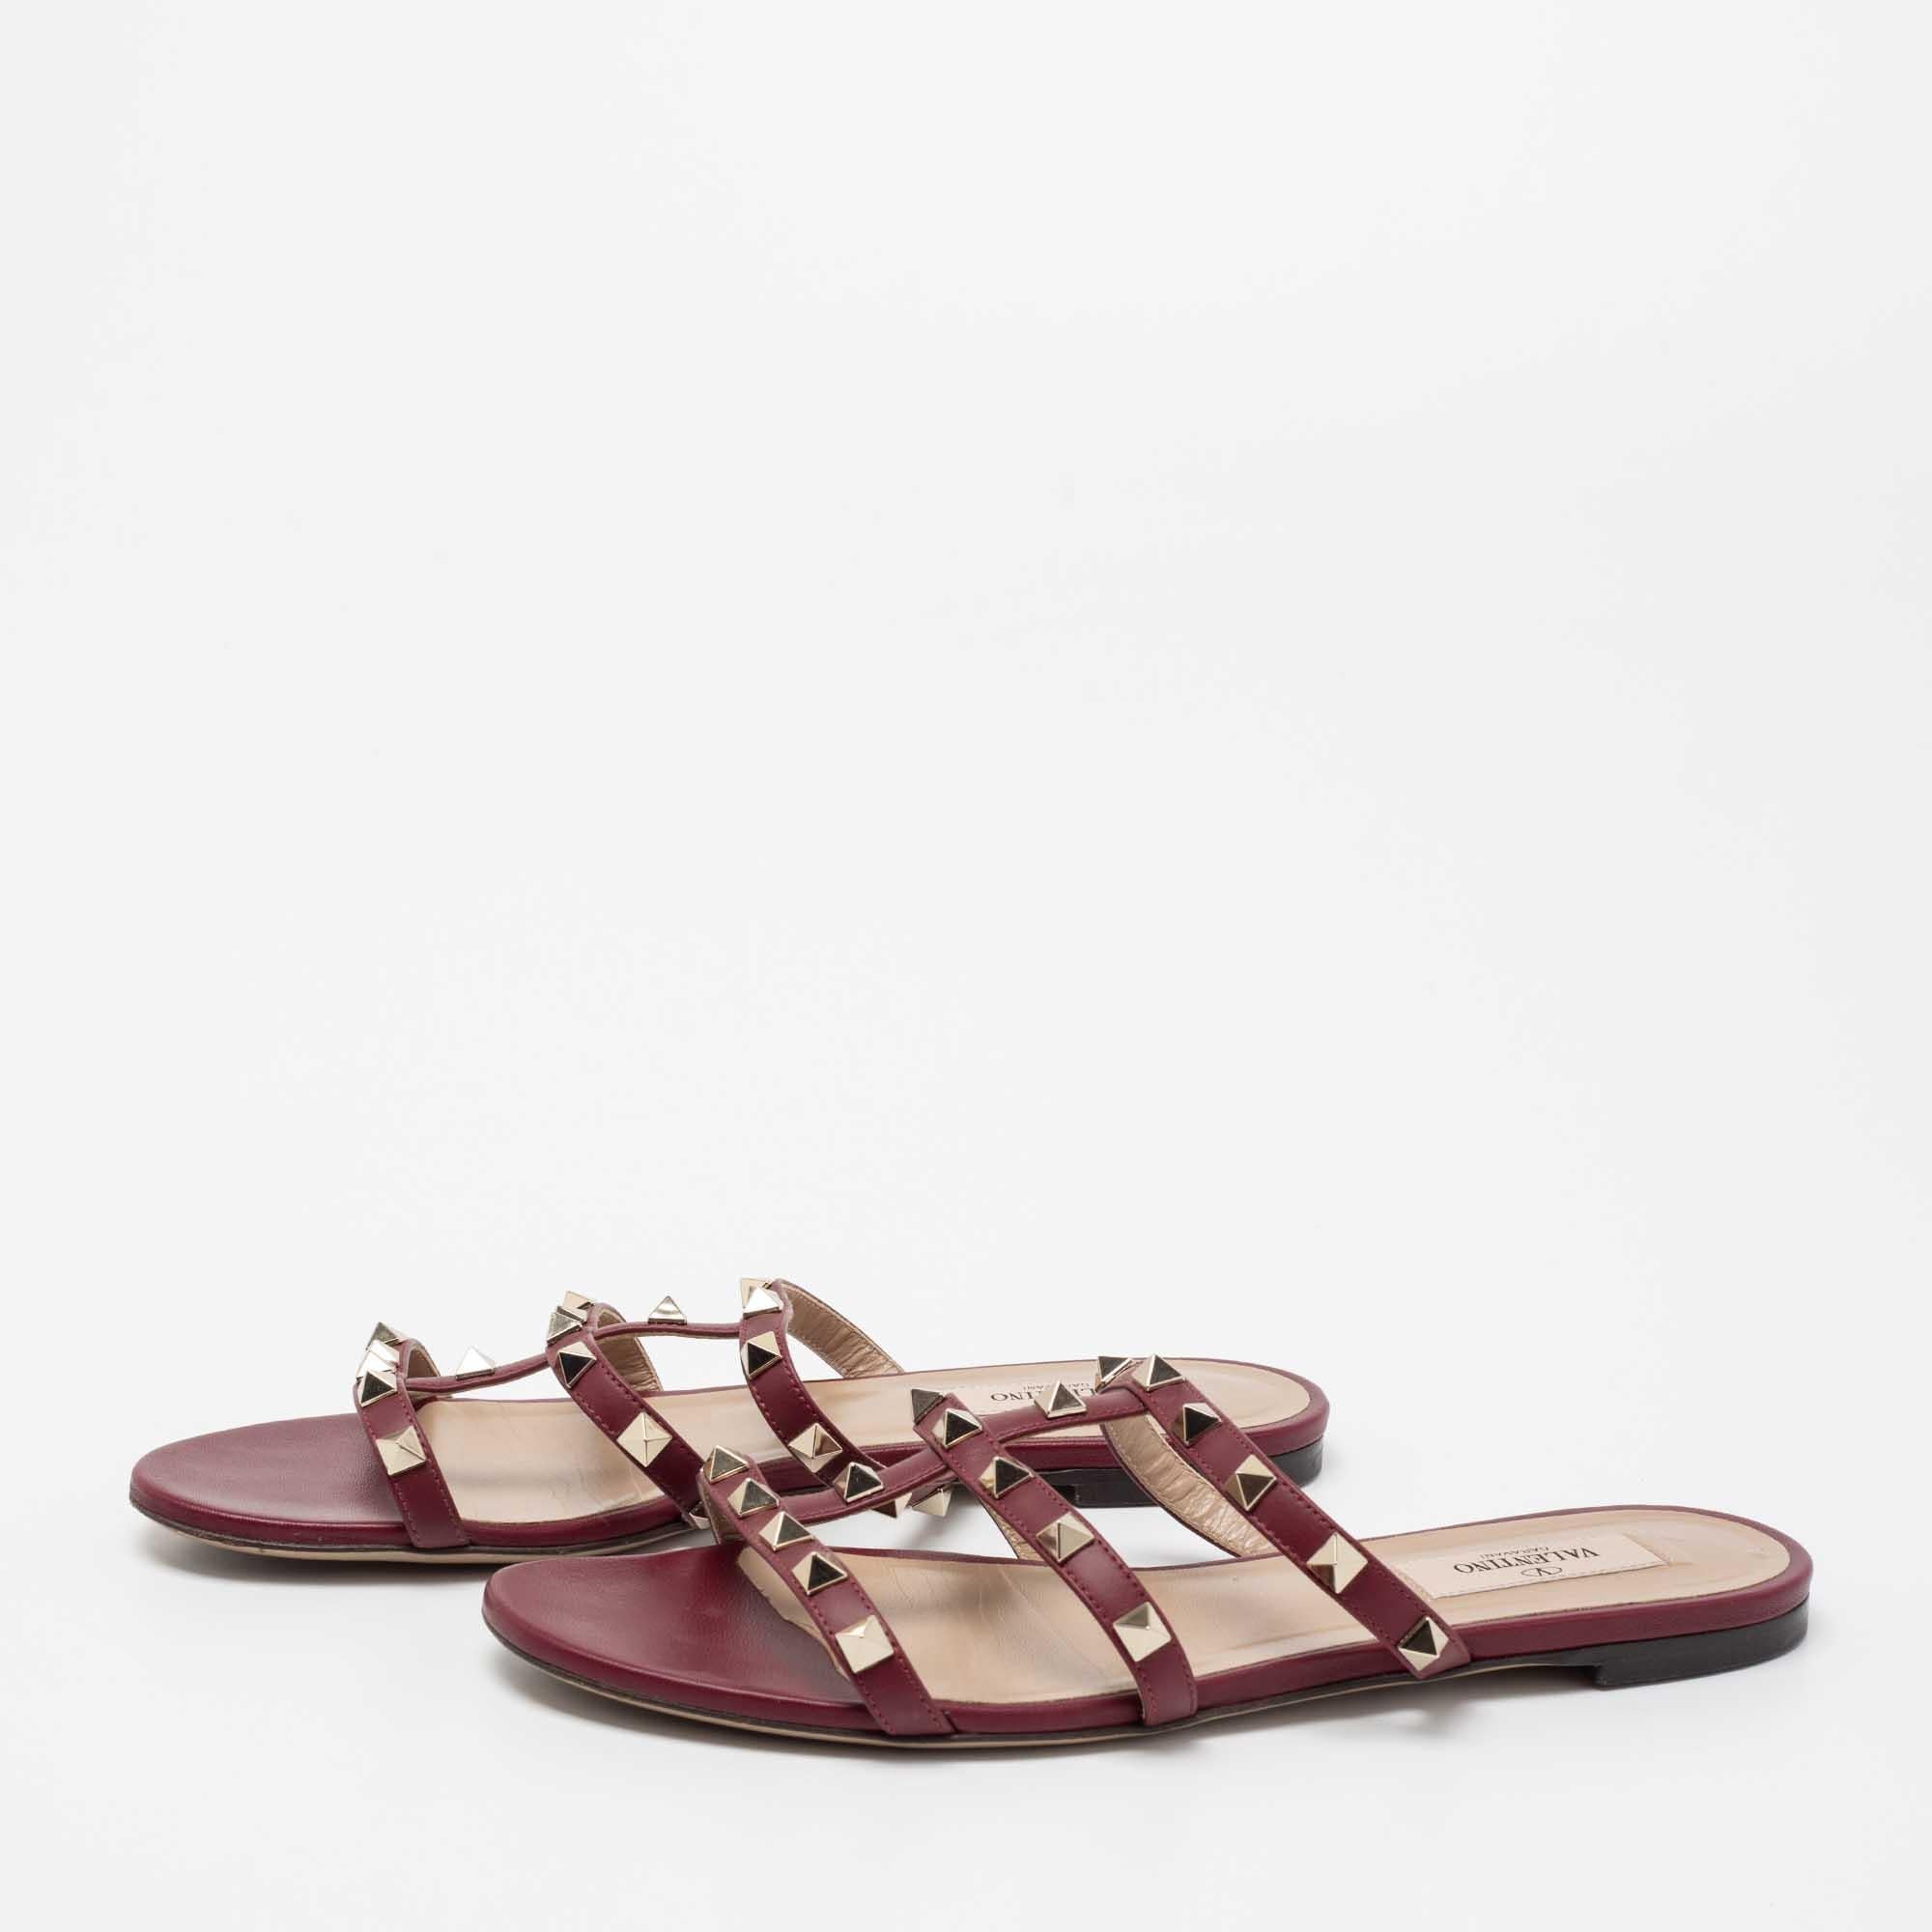 Lend your feet comfort, signature beauty, and luxury with these stunning slide sandals from Valentino. They are crafted using burgundy leather, with Rockstud embellishments perched on the upper. They flaunt gold-tone hardware and a slip-on style.